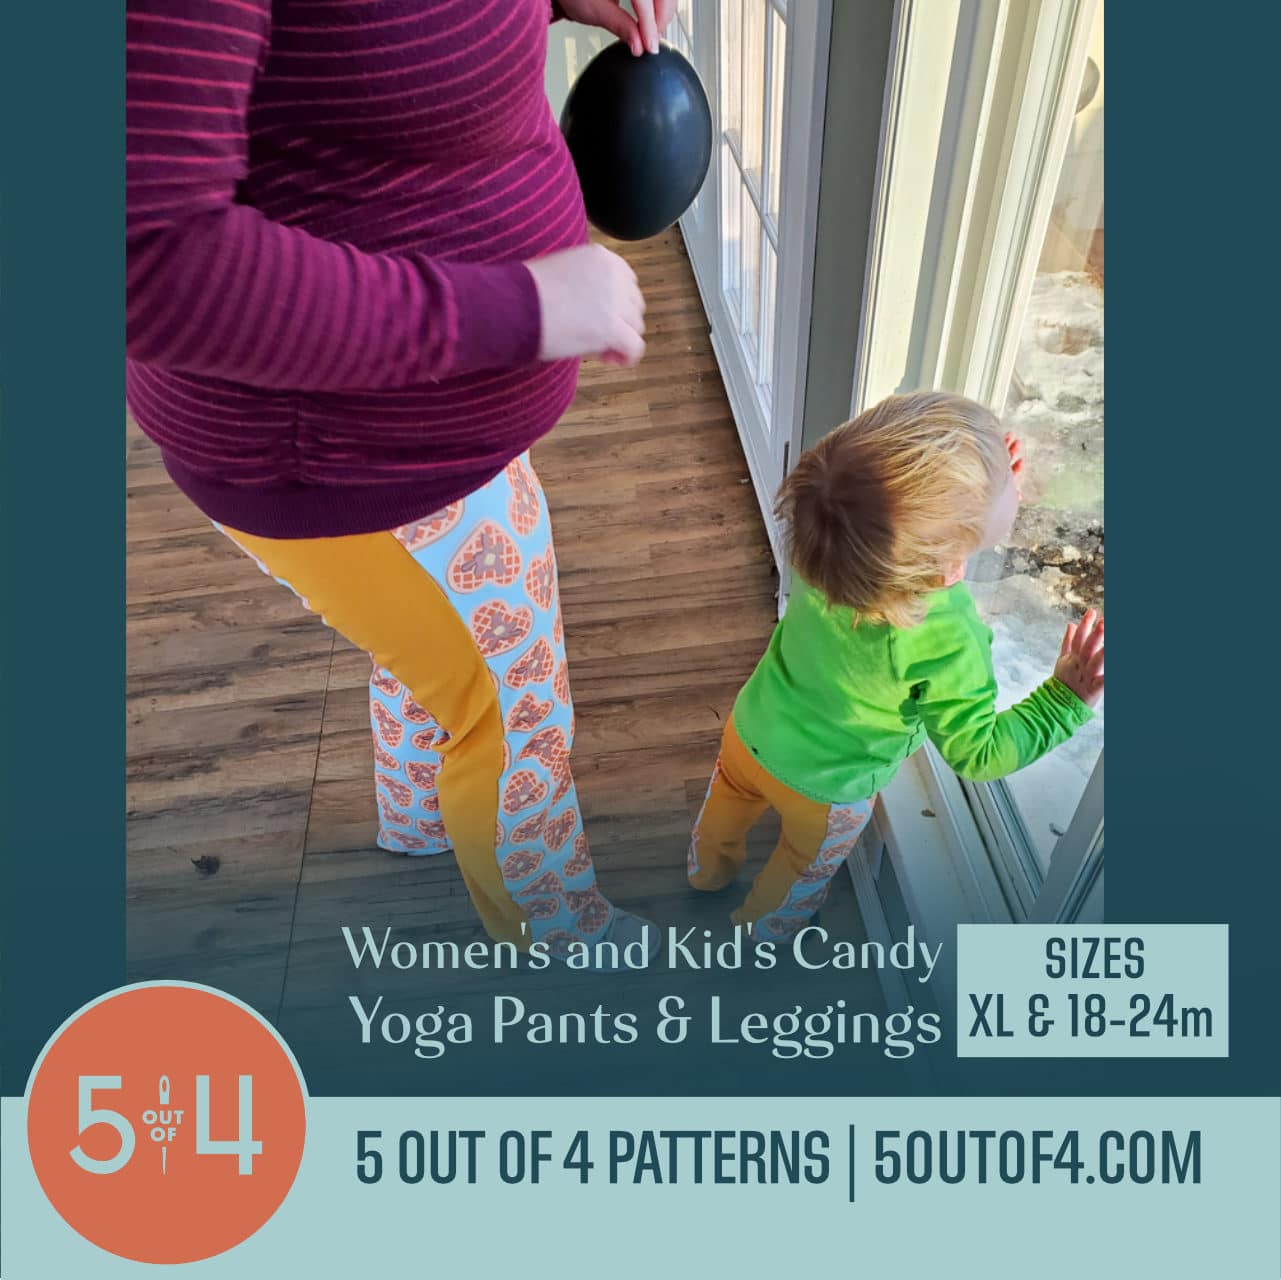 Candy Yoga Pants and Leggings Bundle - 5 out of 4 Patterns